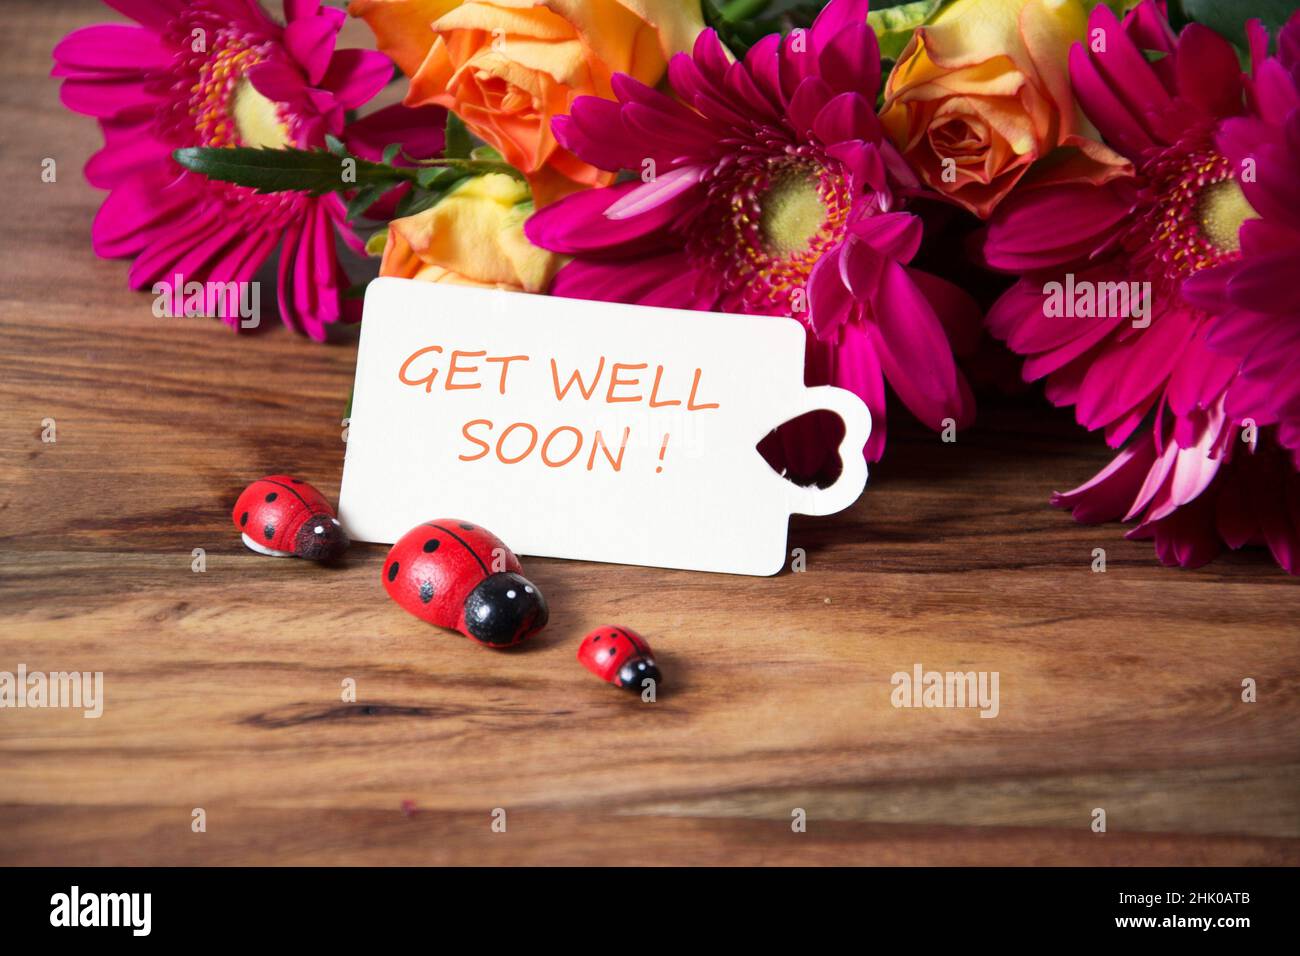 Get Well Soon Cute Teddy With Flower Of Bunch Greetings Card – Evercarts